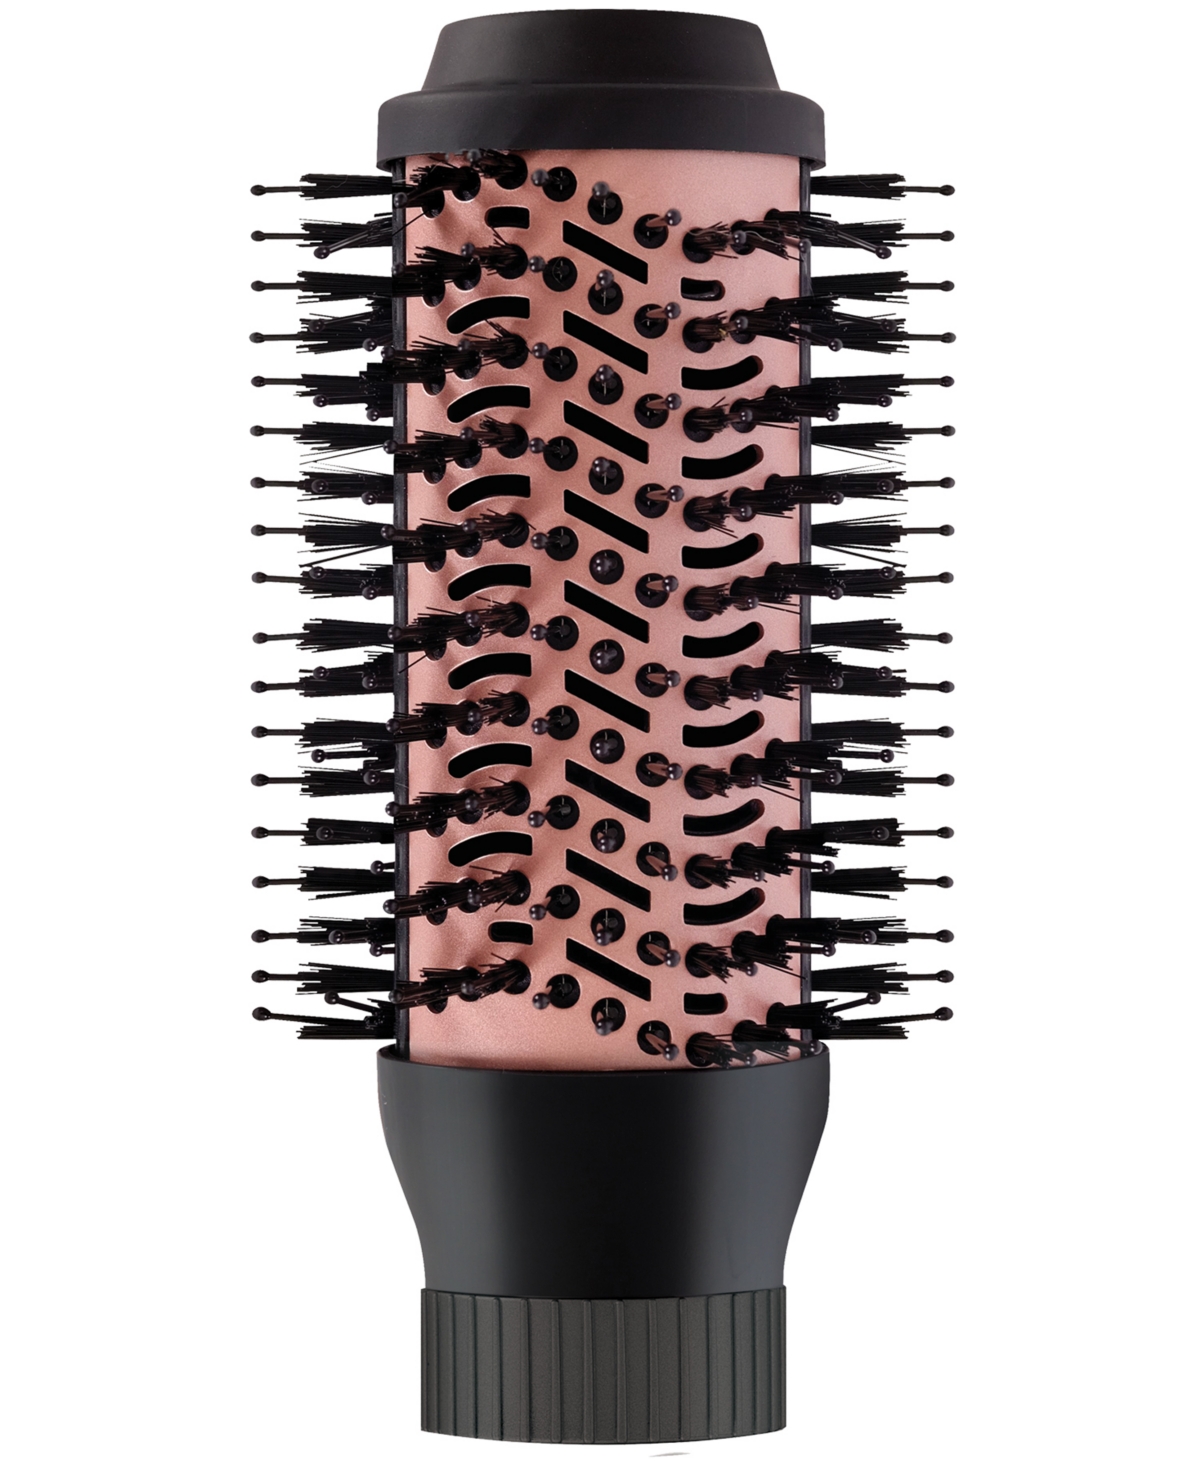 Sutra Beauty Interchangeable 2" Blowout Brush Head Attachment In Black And Rose Gold